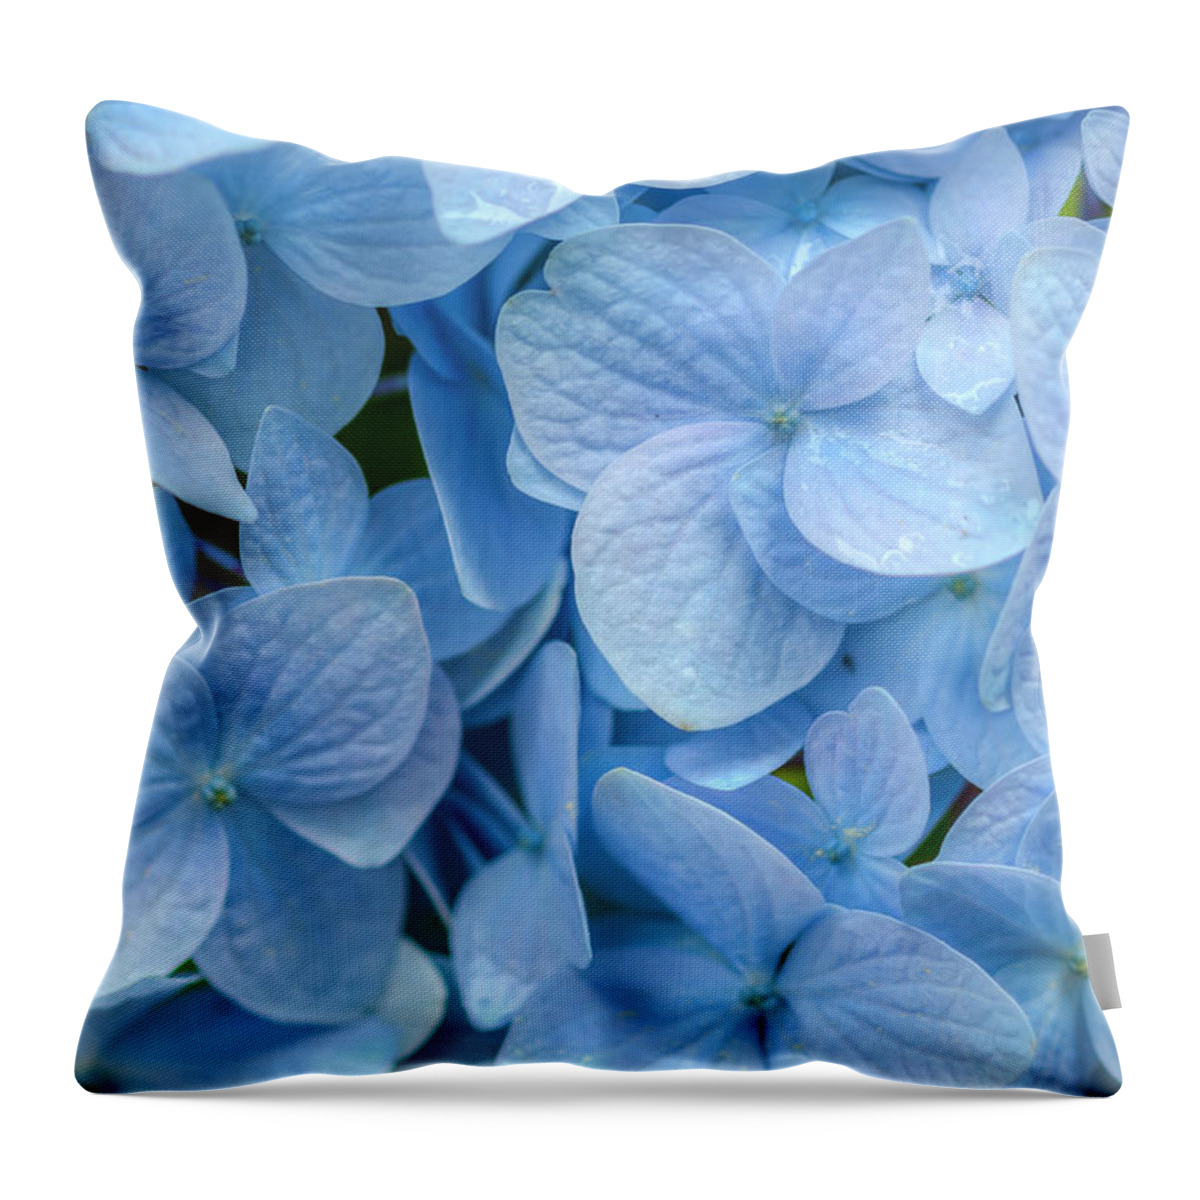 Hydrangea Throw Pillow featuring the photograph Blue Cluster by Kristina Rinell